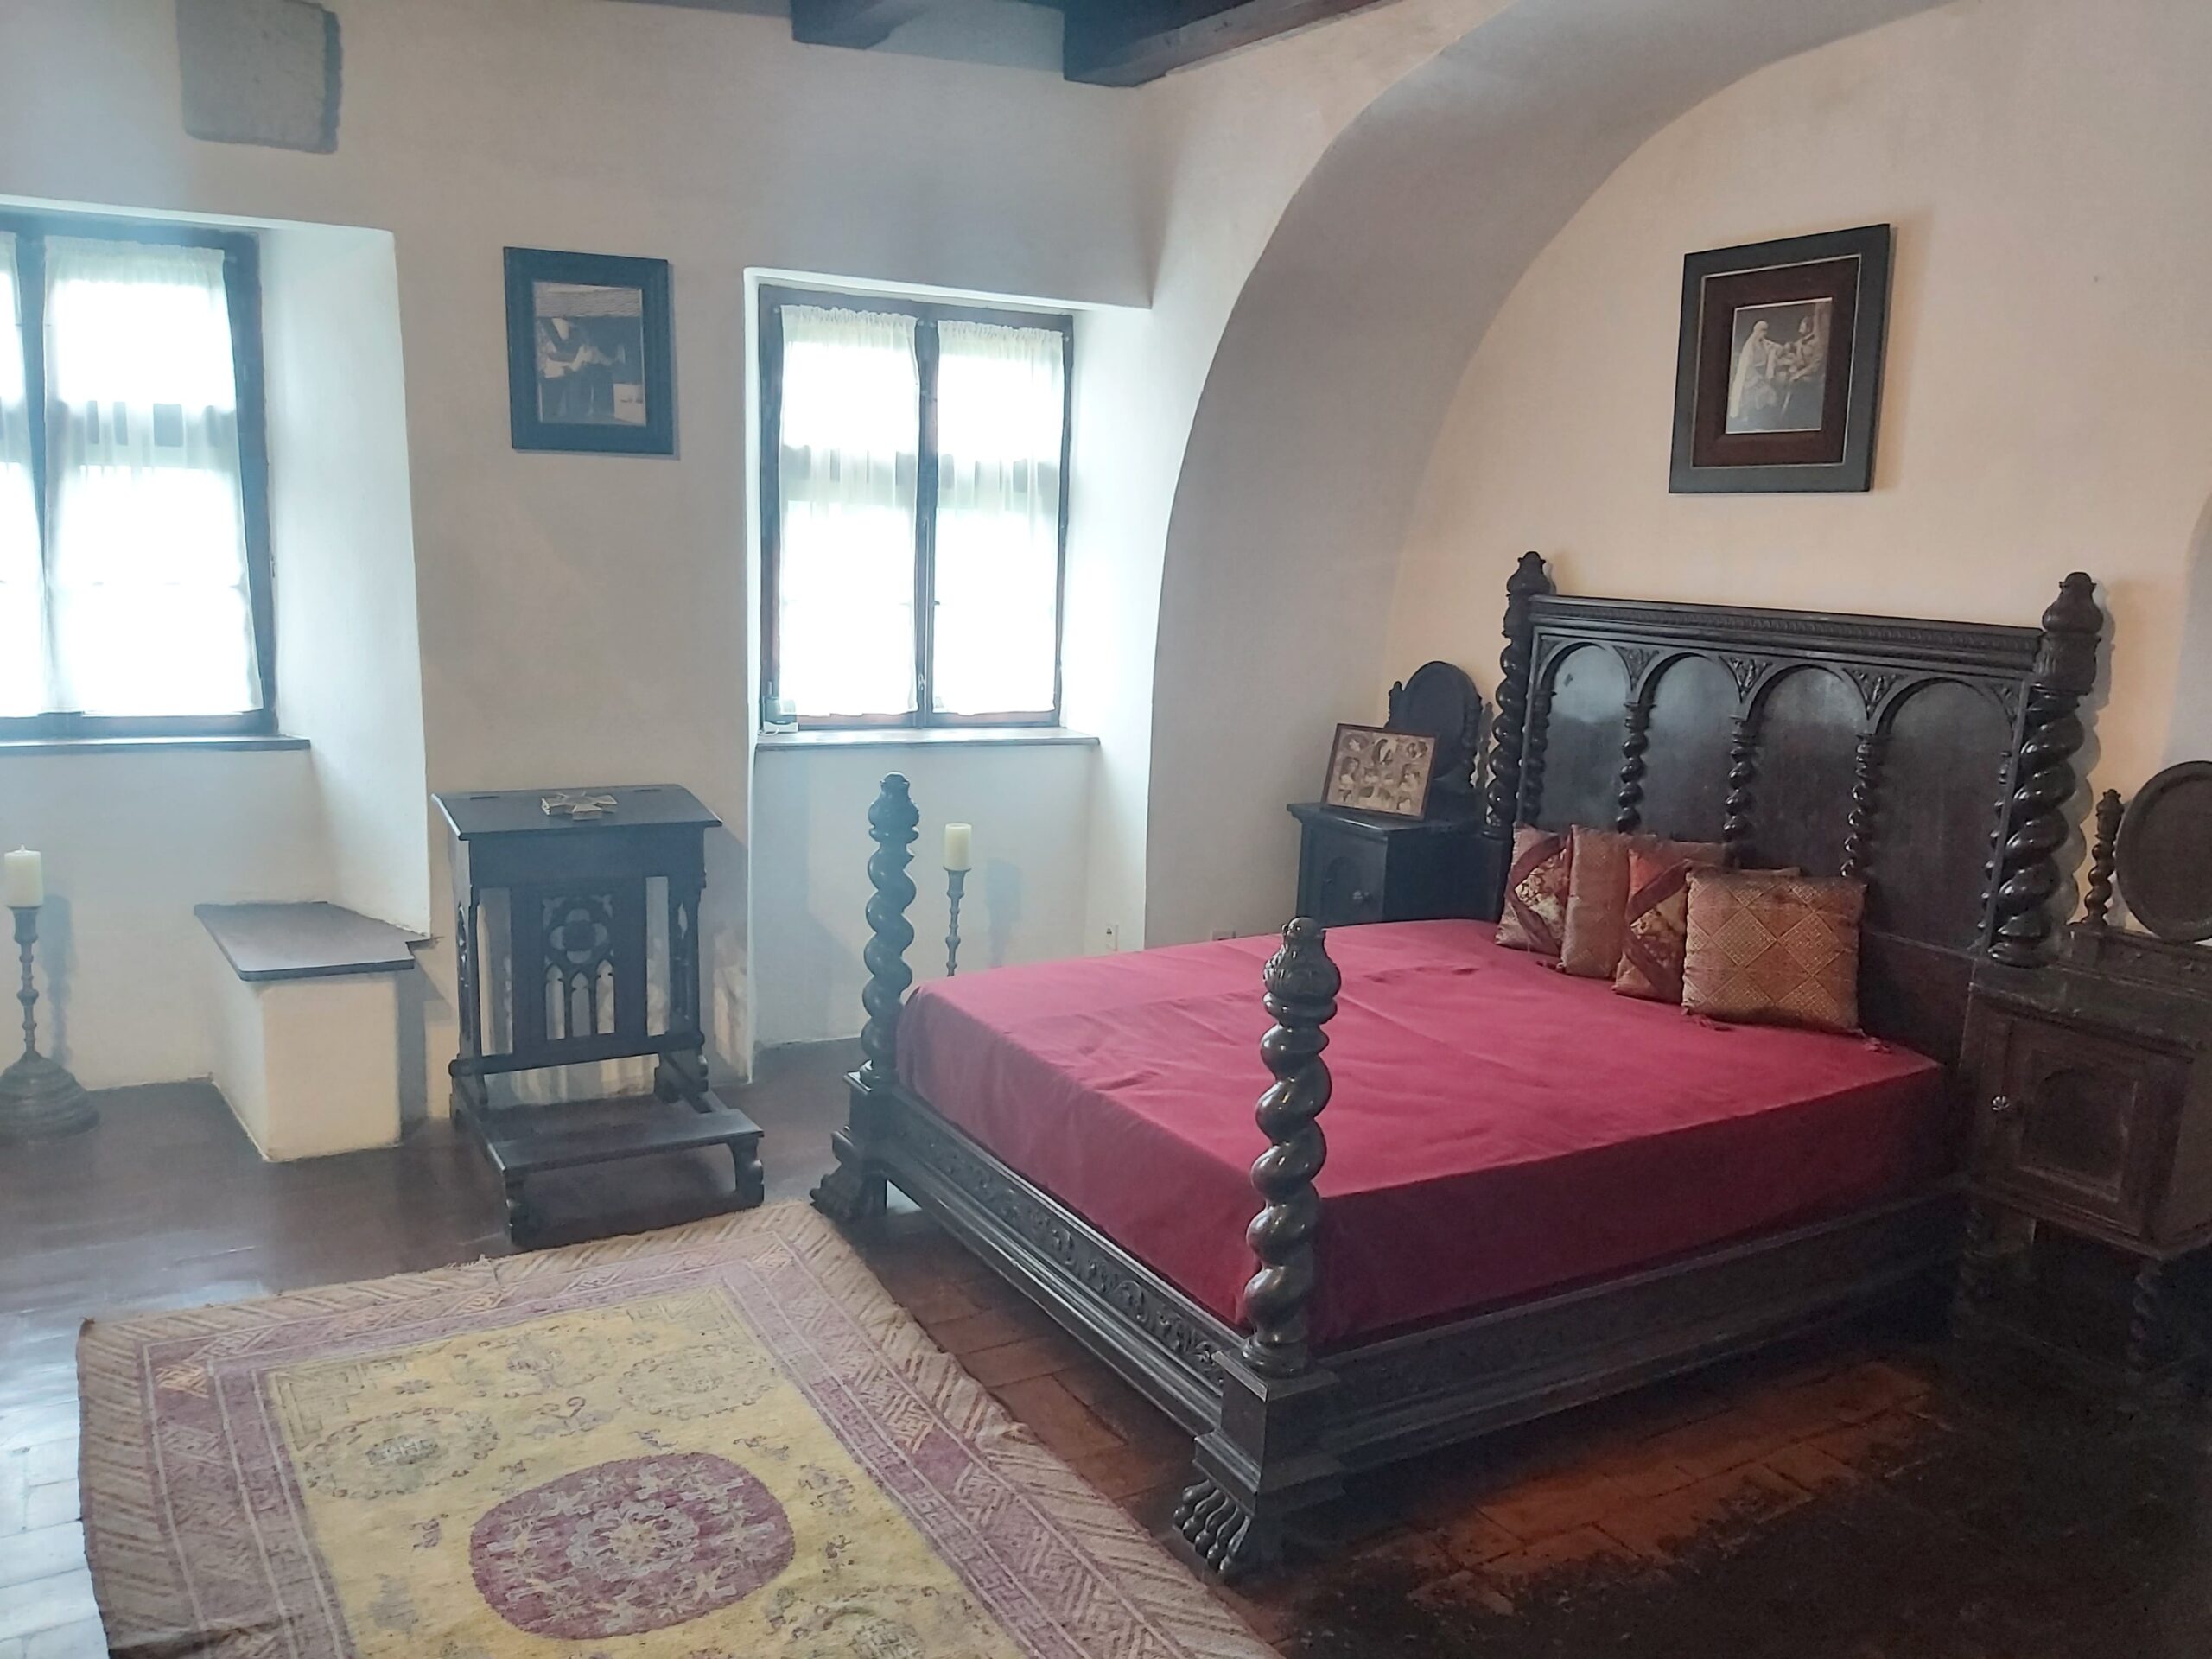 An ornate wooden bed with mat in a bedroom at Bran Castle, Romania